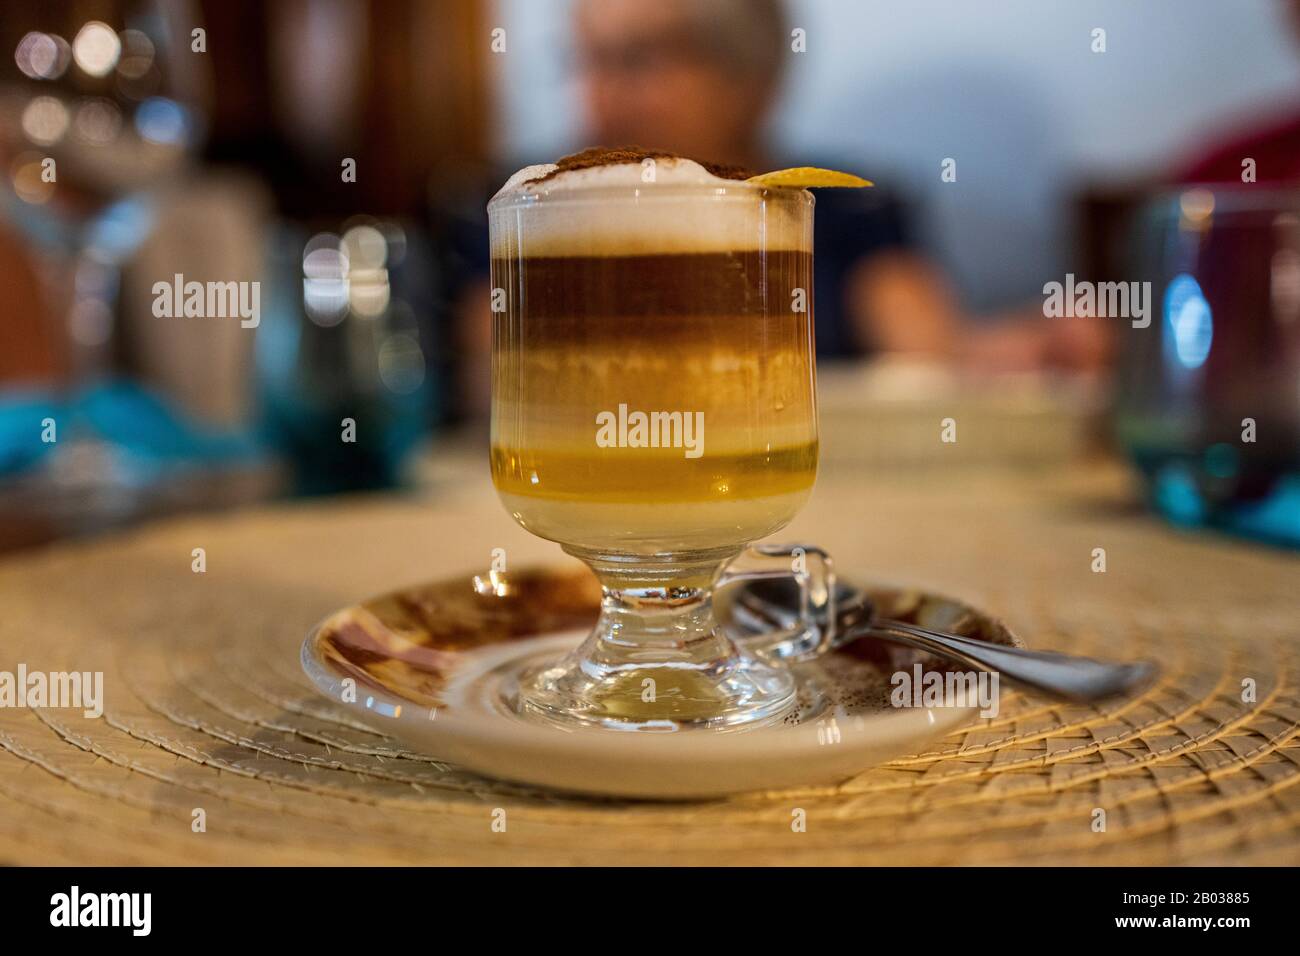 Speciality liqor coffee known as a barriquito, layers of condensed milk, oroang liquor, coffe, and frothy milk topped with cinnamon and lemon rind, Te Stock Photo